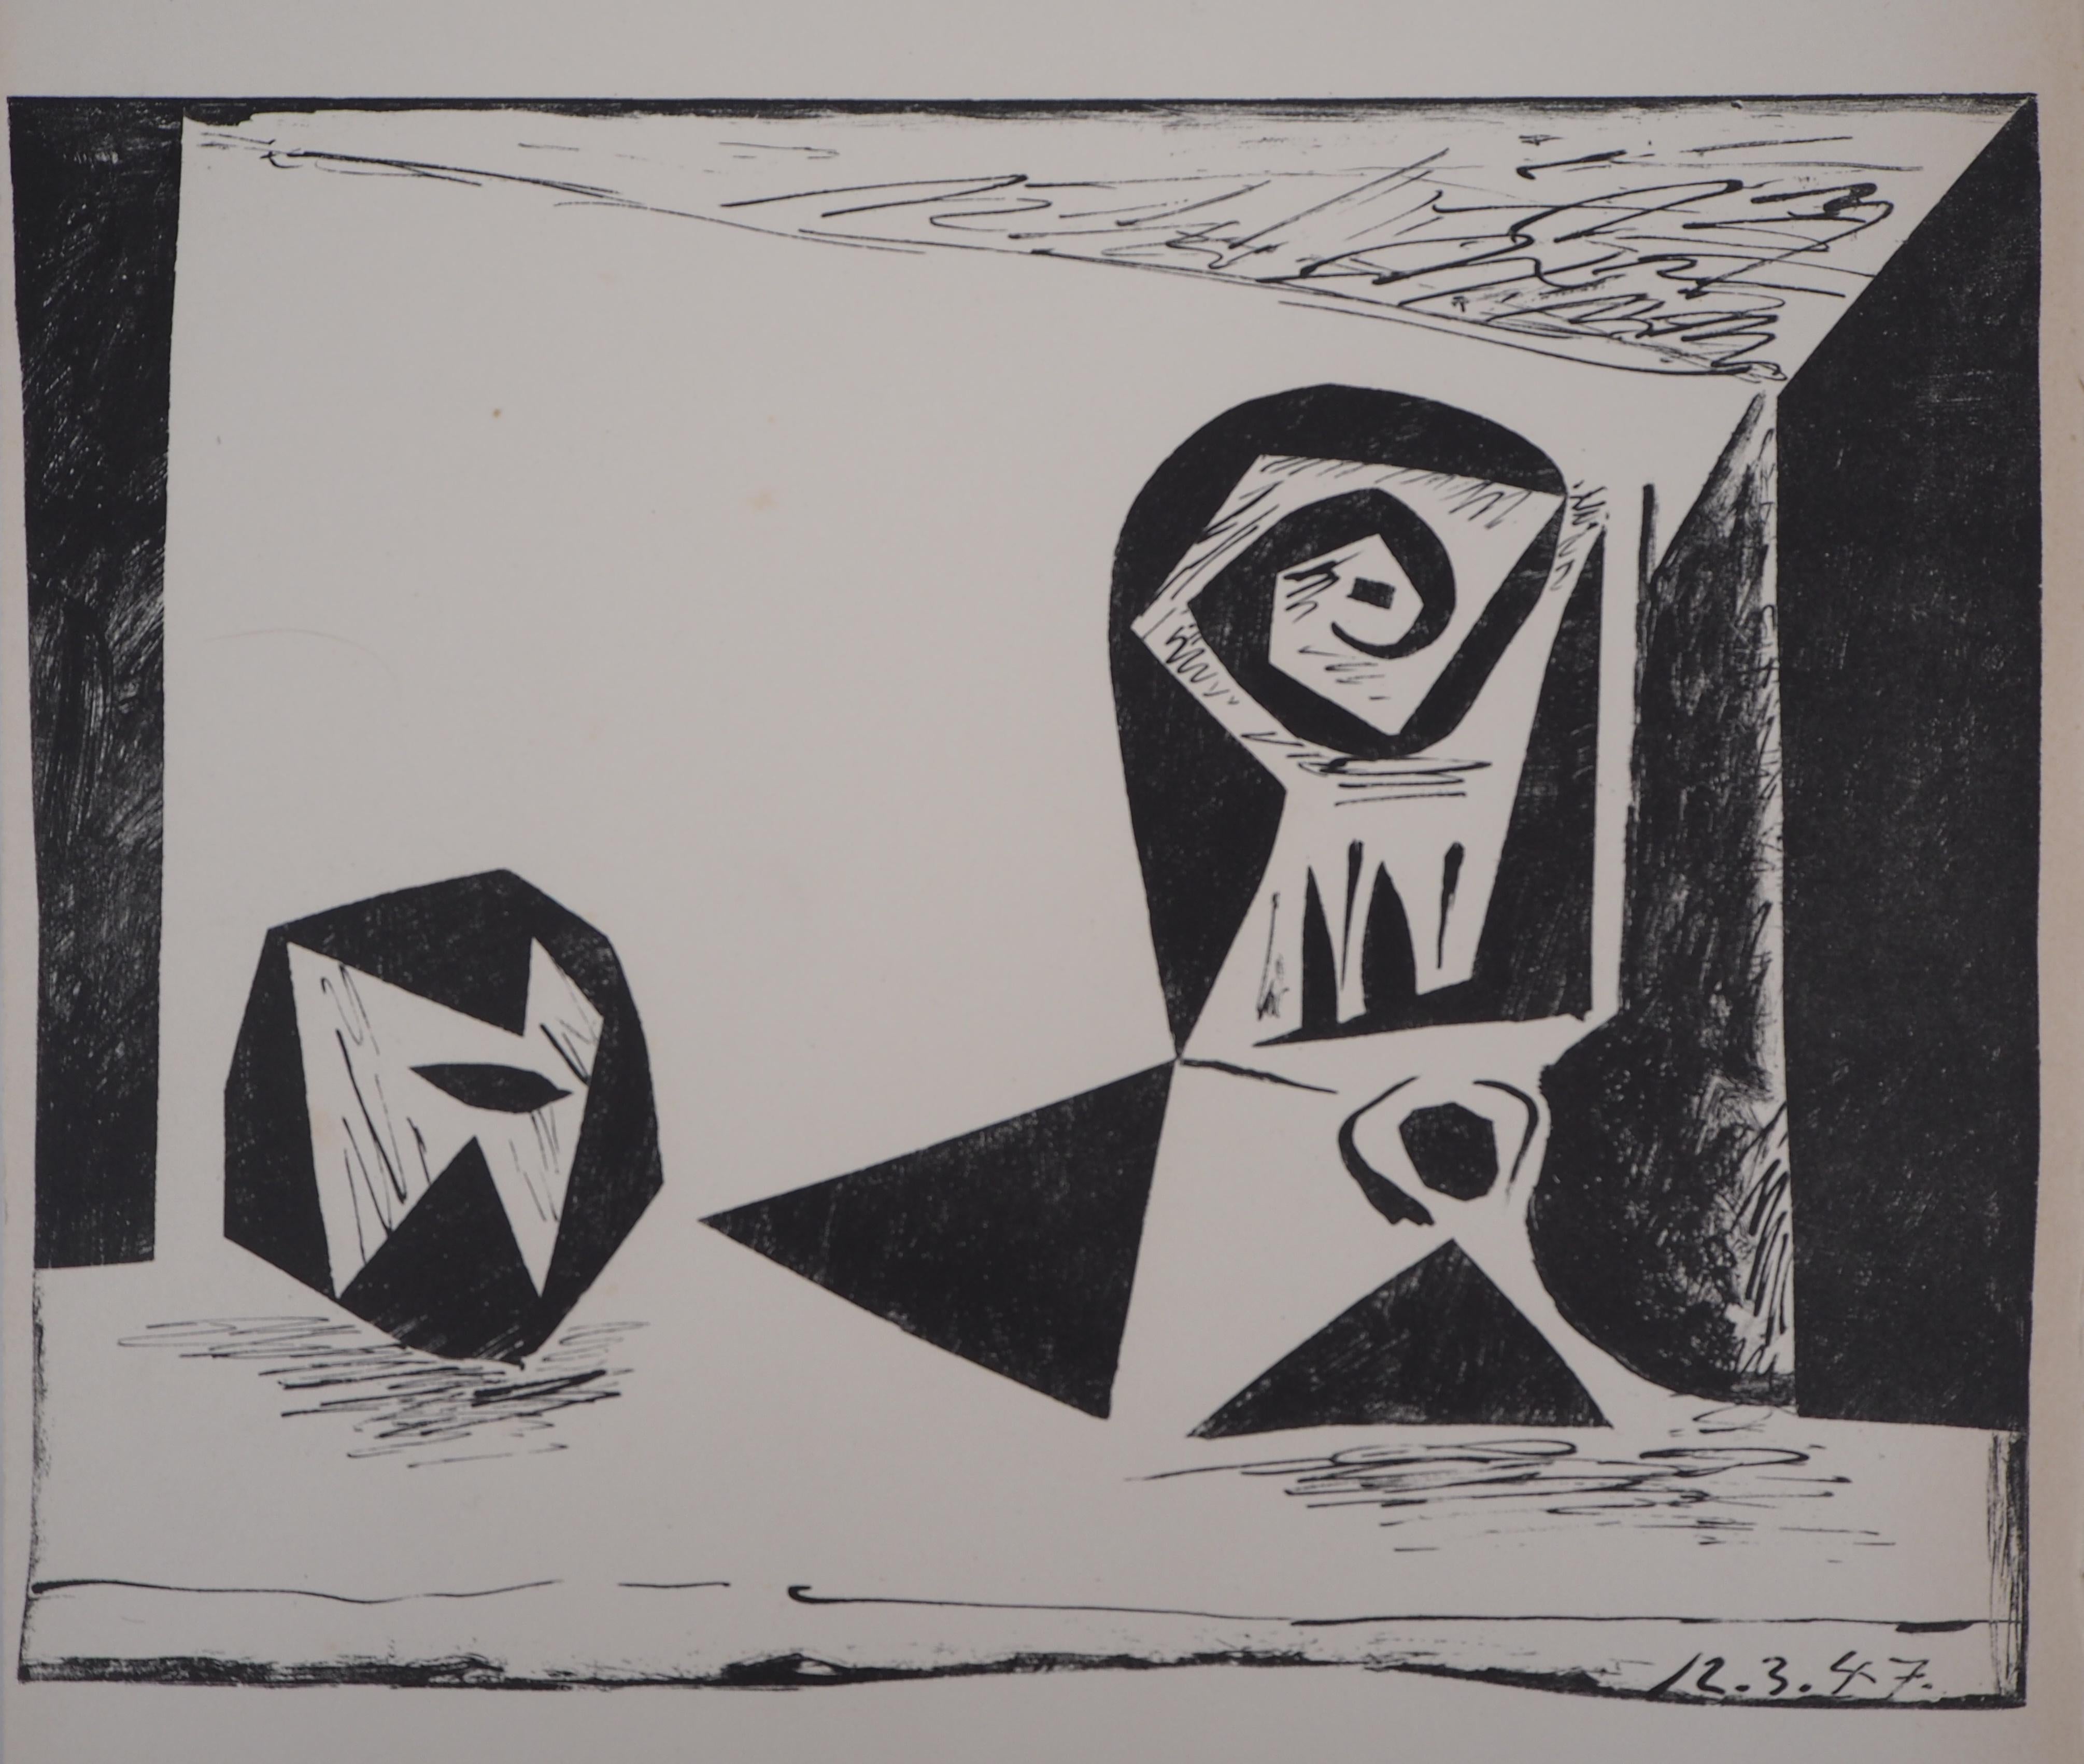 Pablo Picasso Still-Life Print - Cubist Composition with Glass and Apple - Original lithograph - Mourlot #77